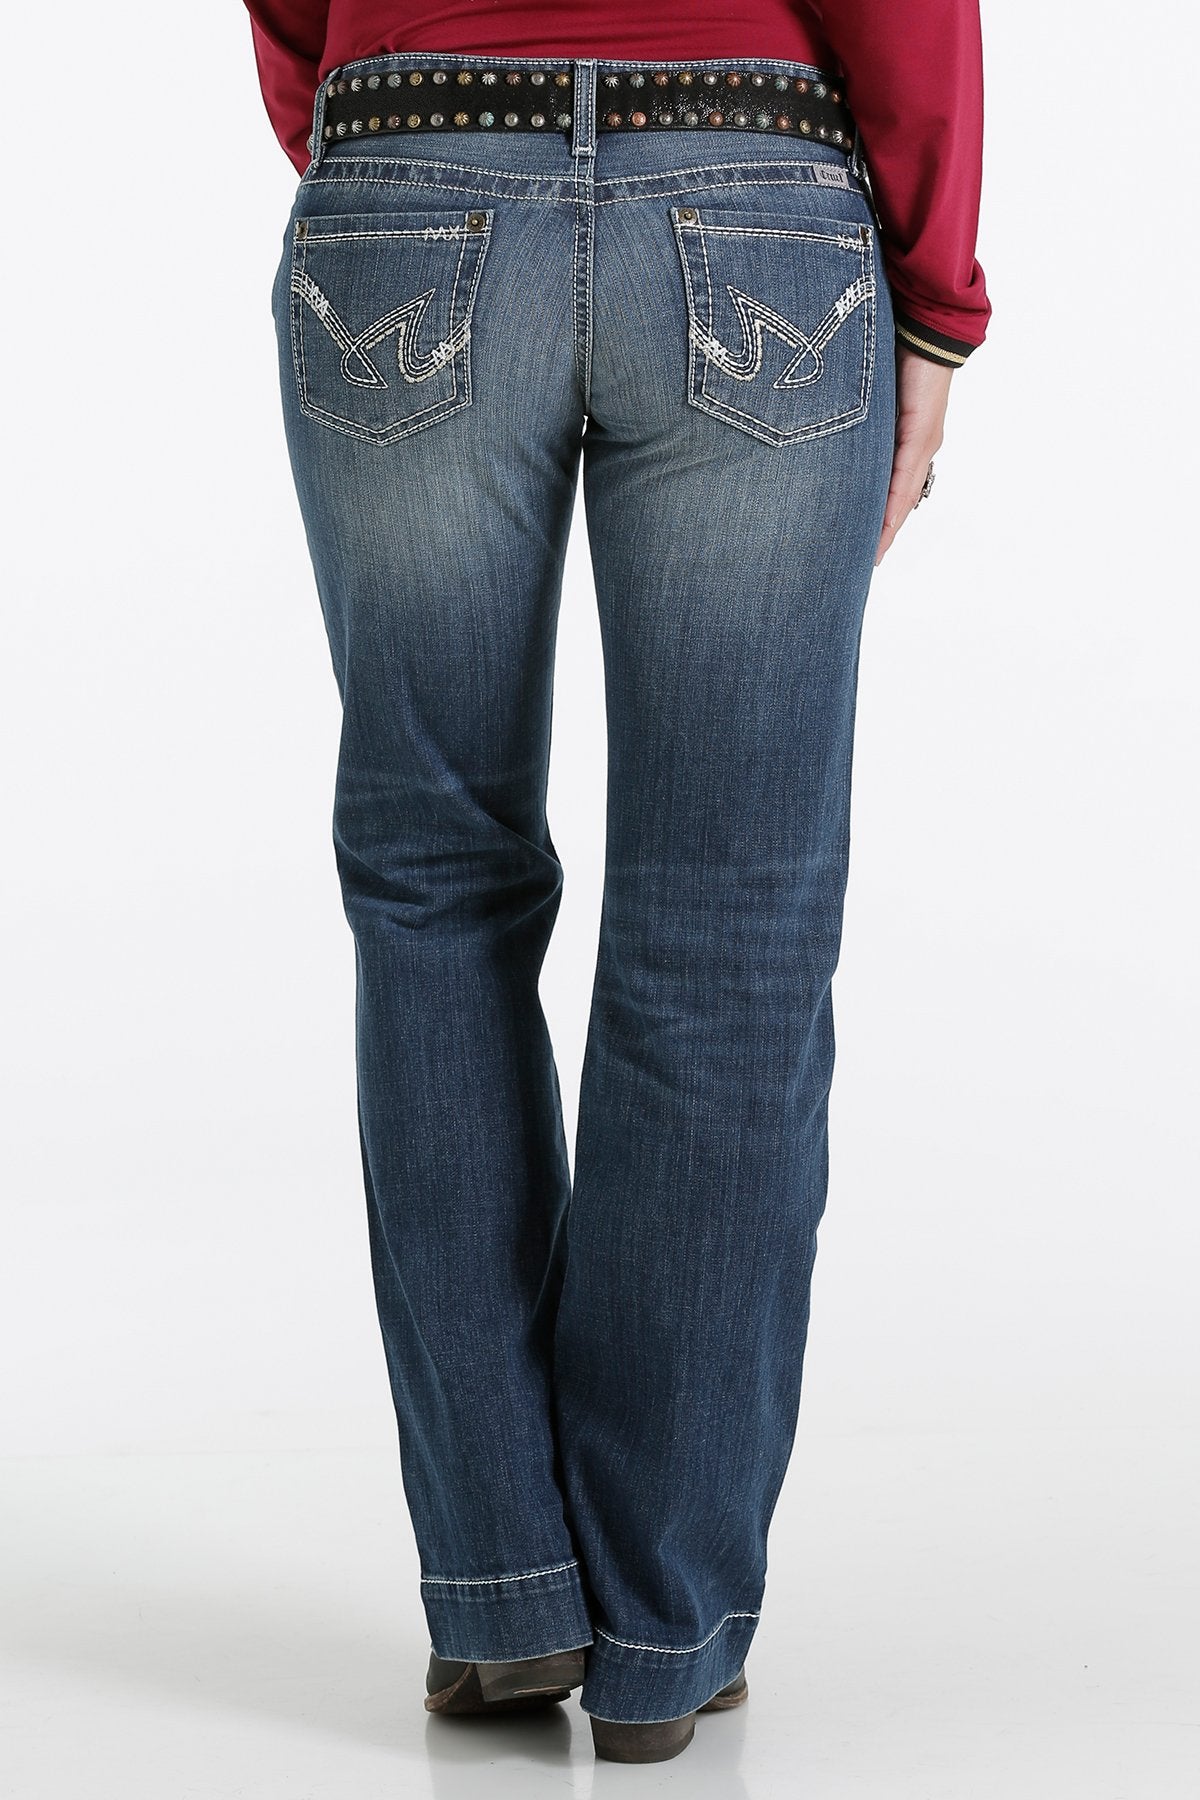 Denim trouser with floral embroidery in black | GUCCI® LU